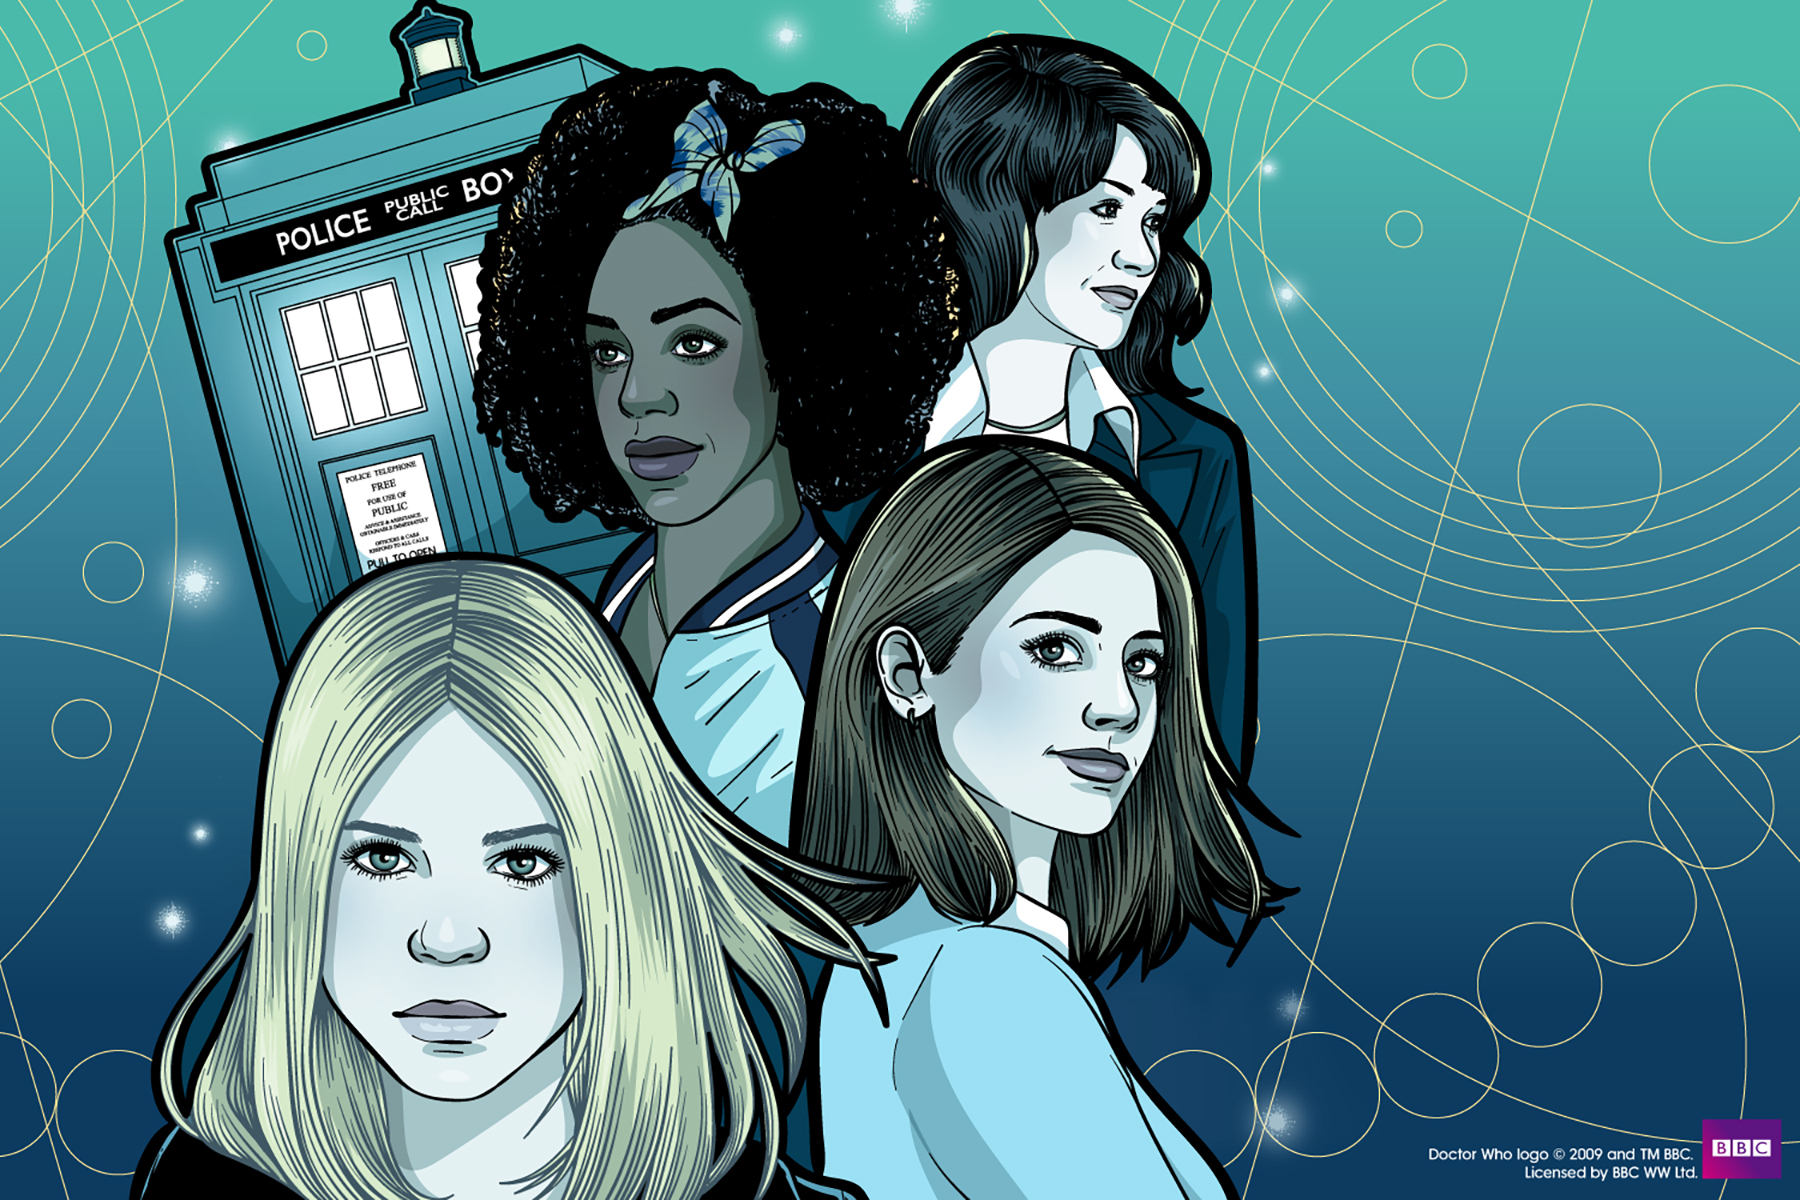 An illustration in a graphic, comic book-style from the book The Day She Saved the Doctor featuring four of Doctor Who's companions; Rose, Clara, Sarah-Jane and Bill